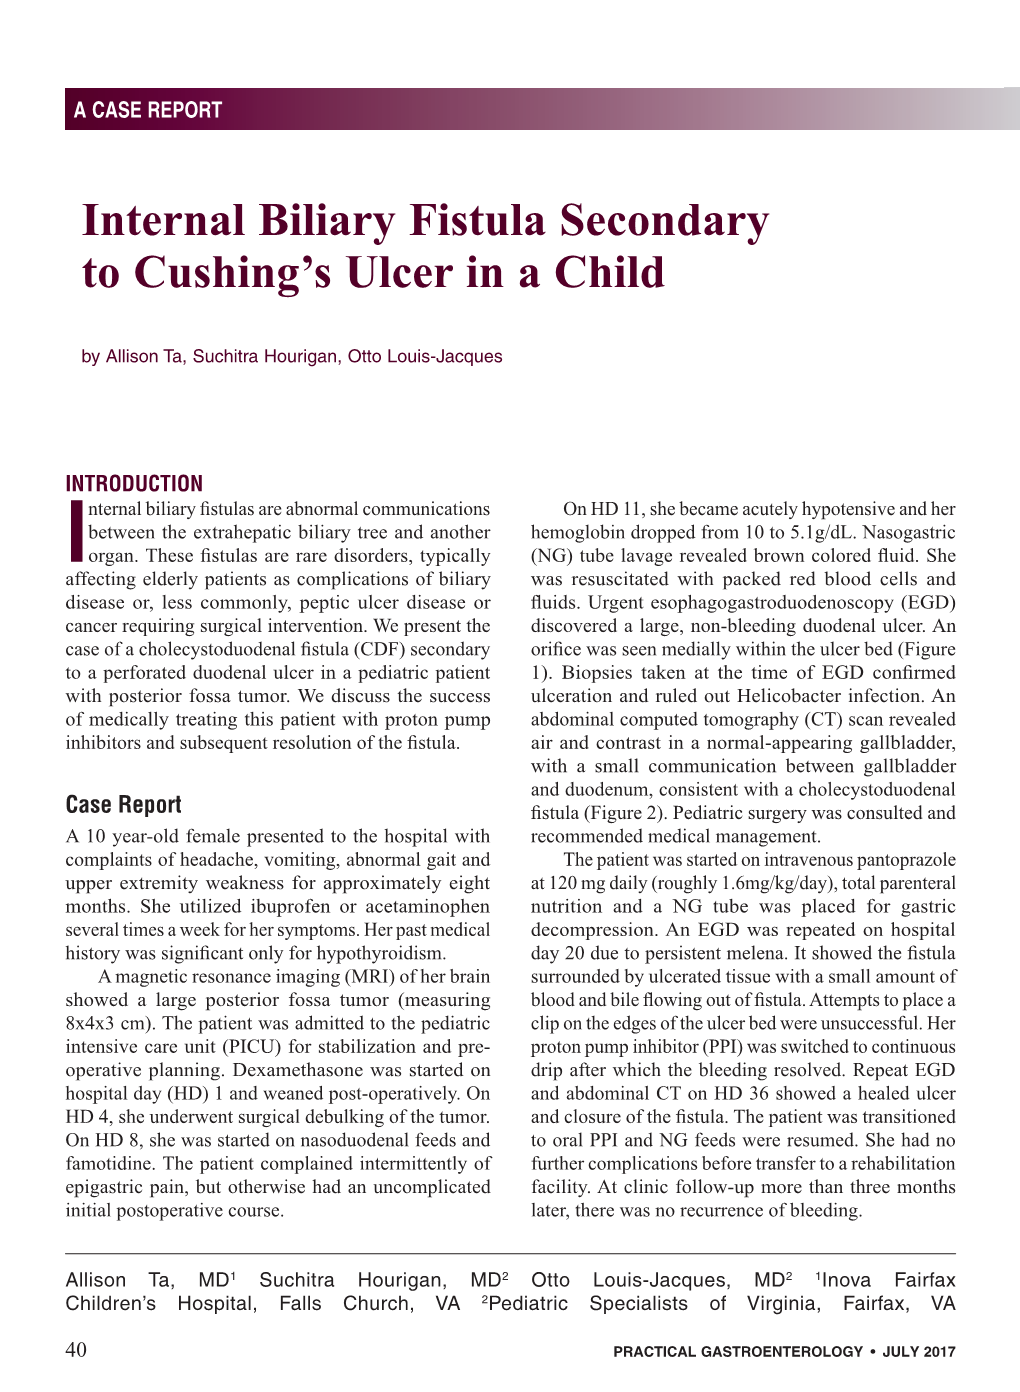 Internal Biliary Fistula Secondary to Cushing's Ulcer in a Child